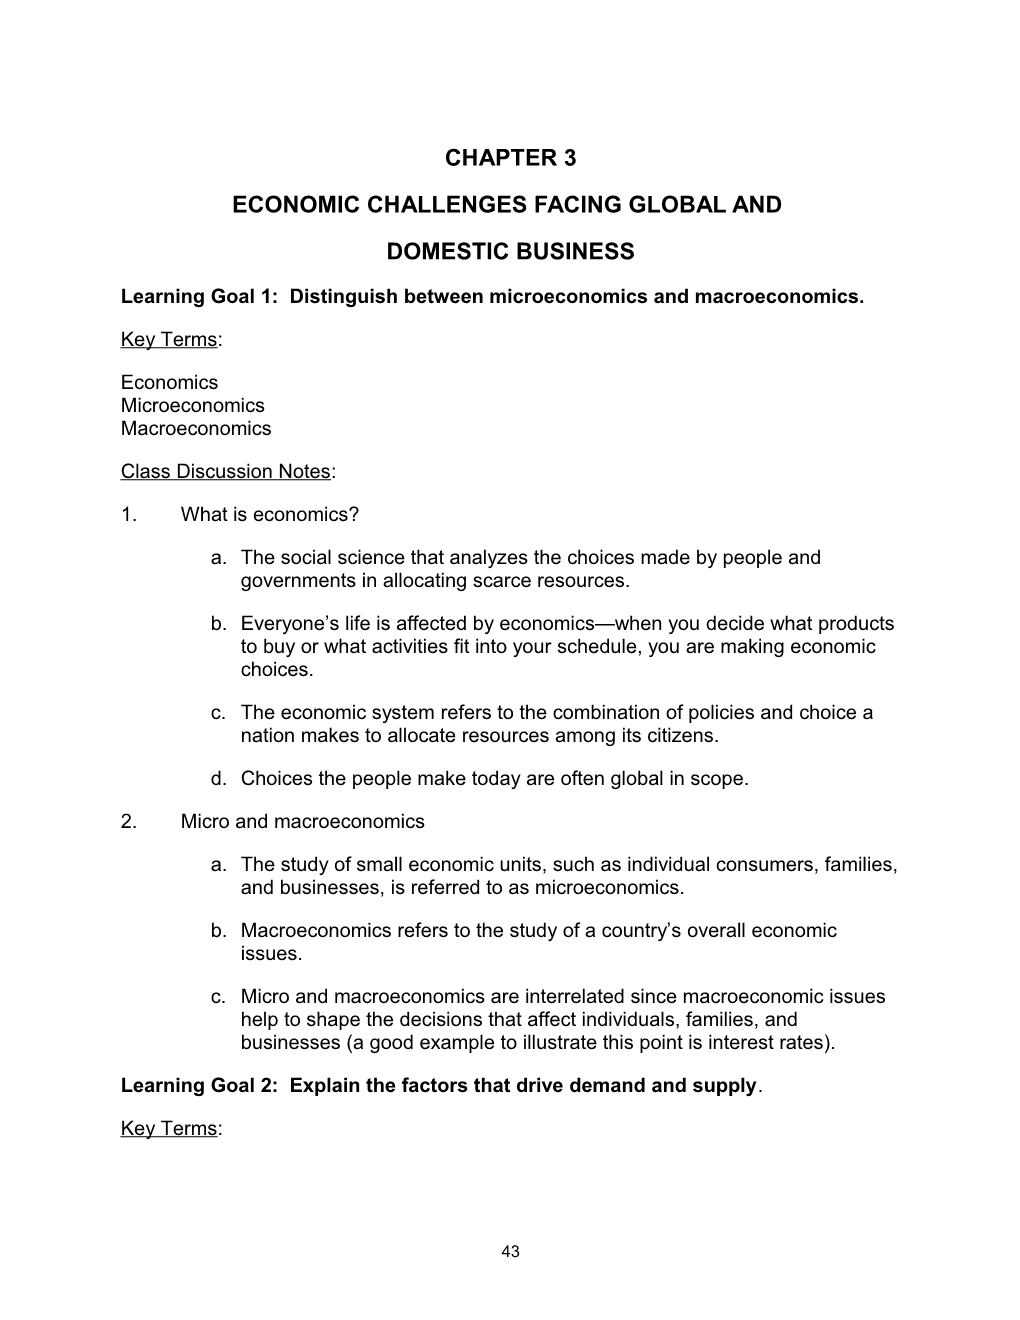 Economic Challenges Facing Global And